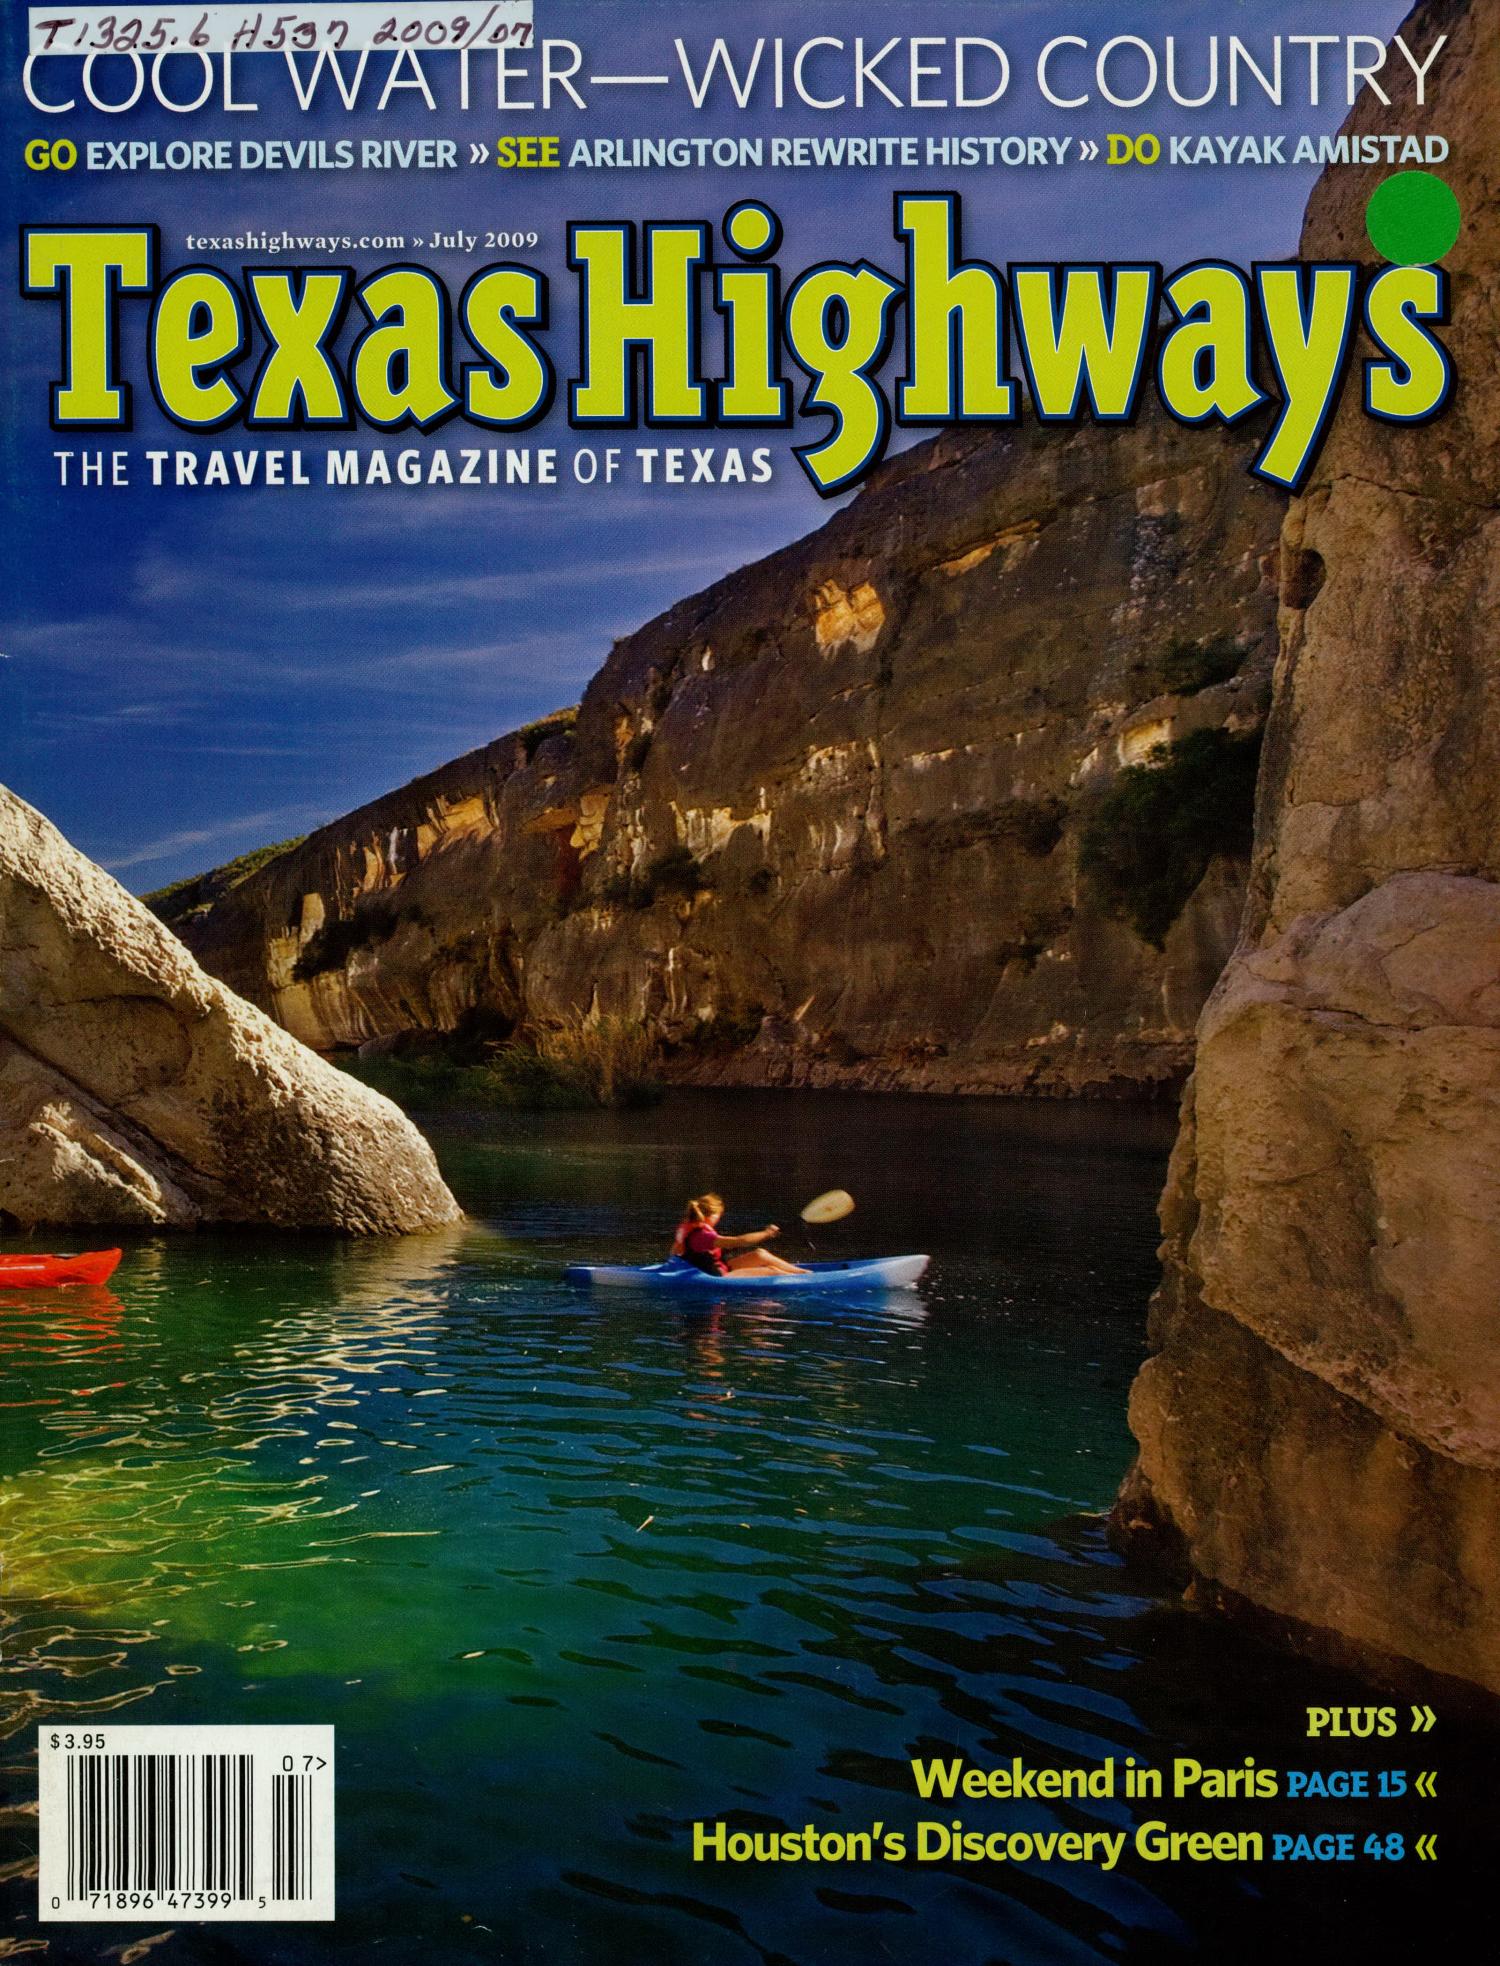 Texas Highways, Volume 56, Number 7, July 2009
                                                
                                                    FRONT COVER
                                                